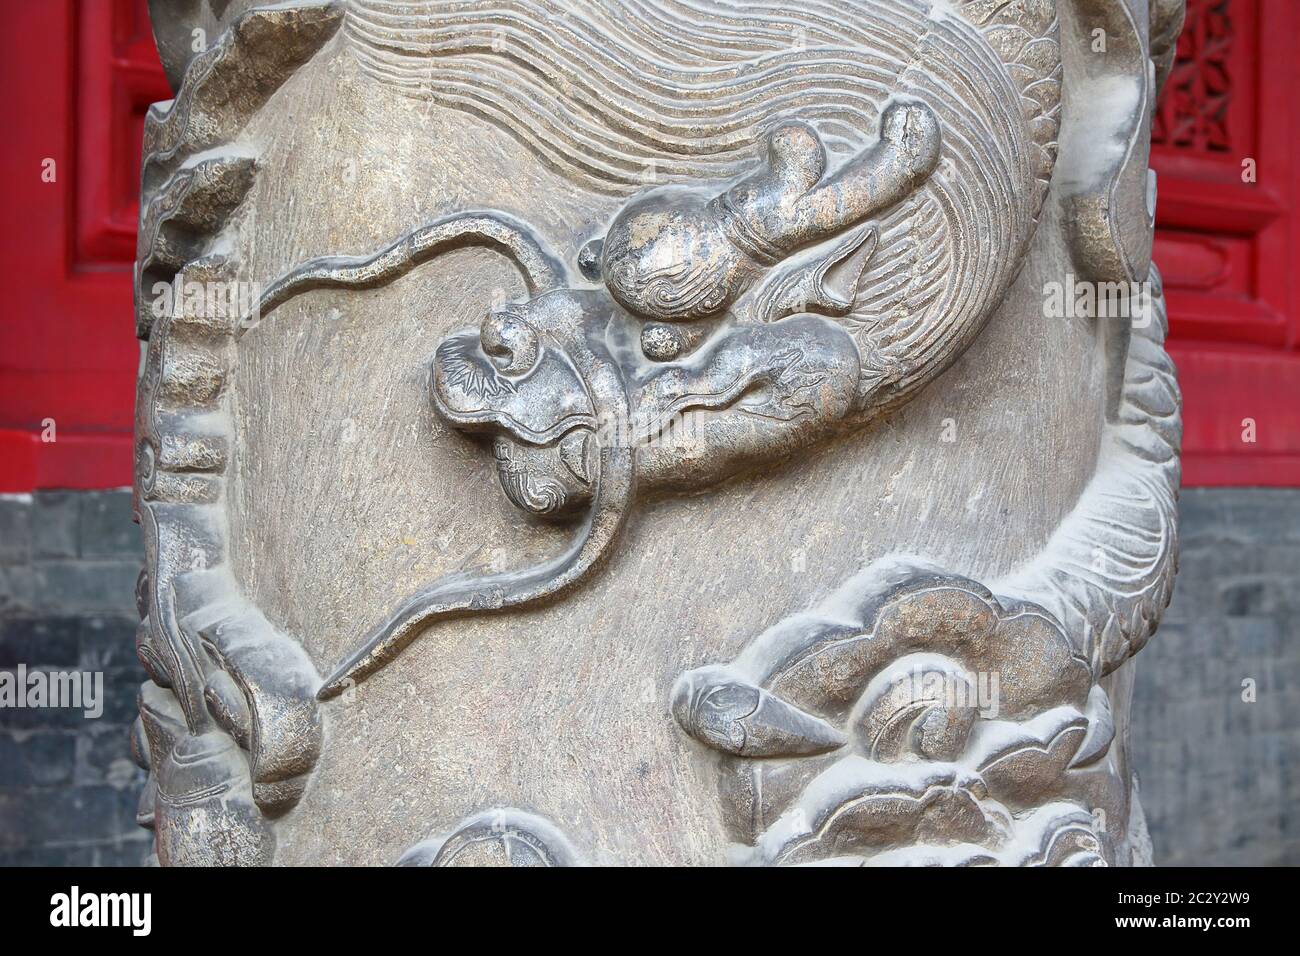 Image of a dragon head sculpted on a column. Horizontal orientation. Stock Photo